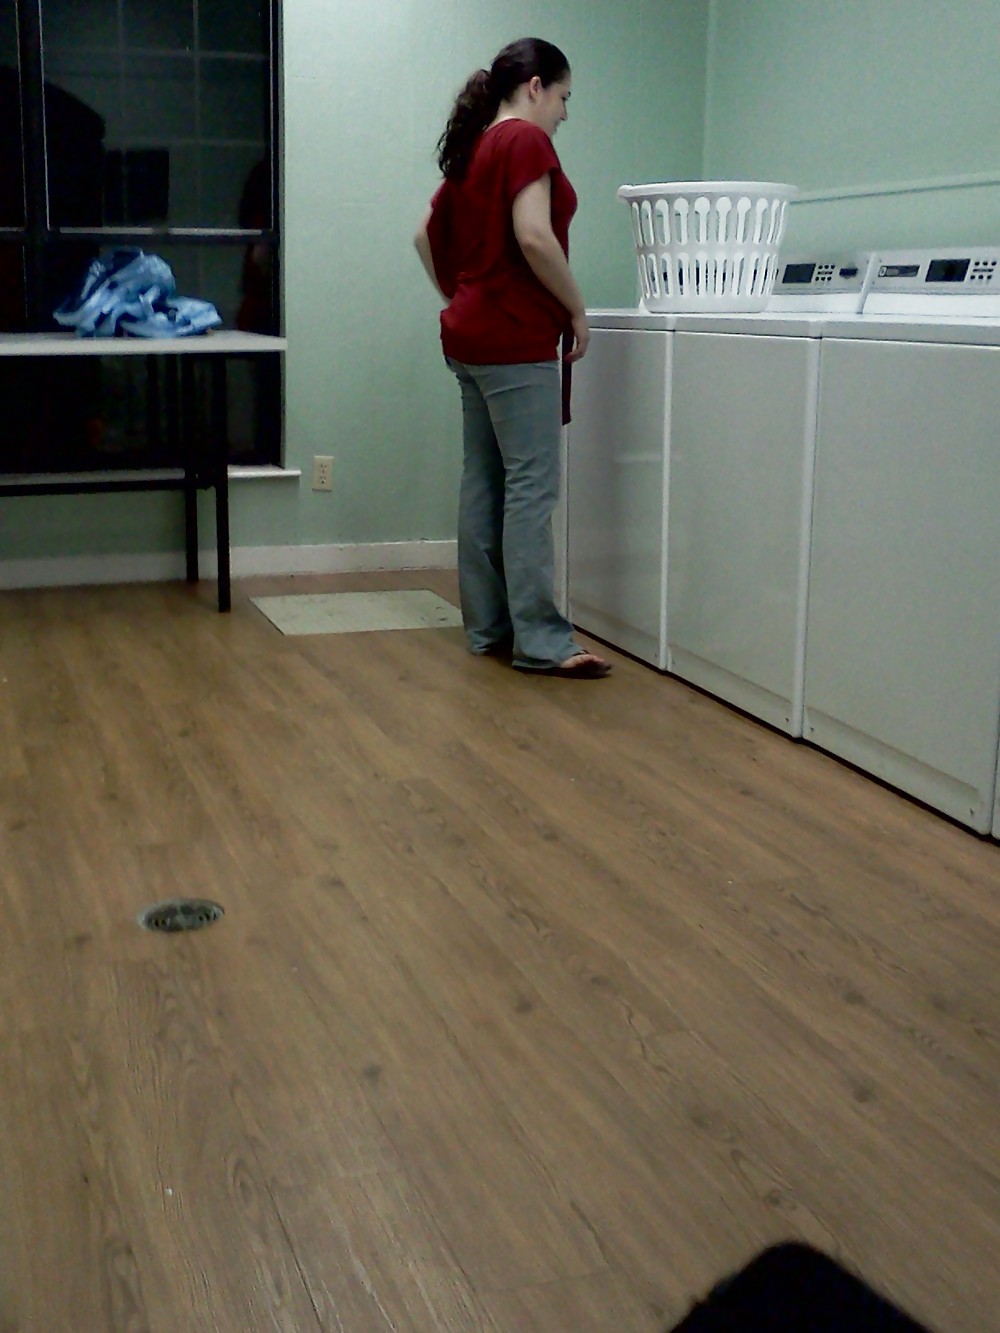 Chick doing laundry #7932755